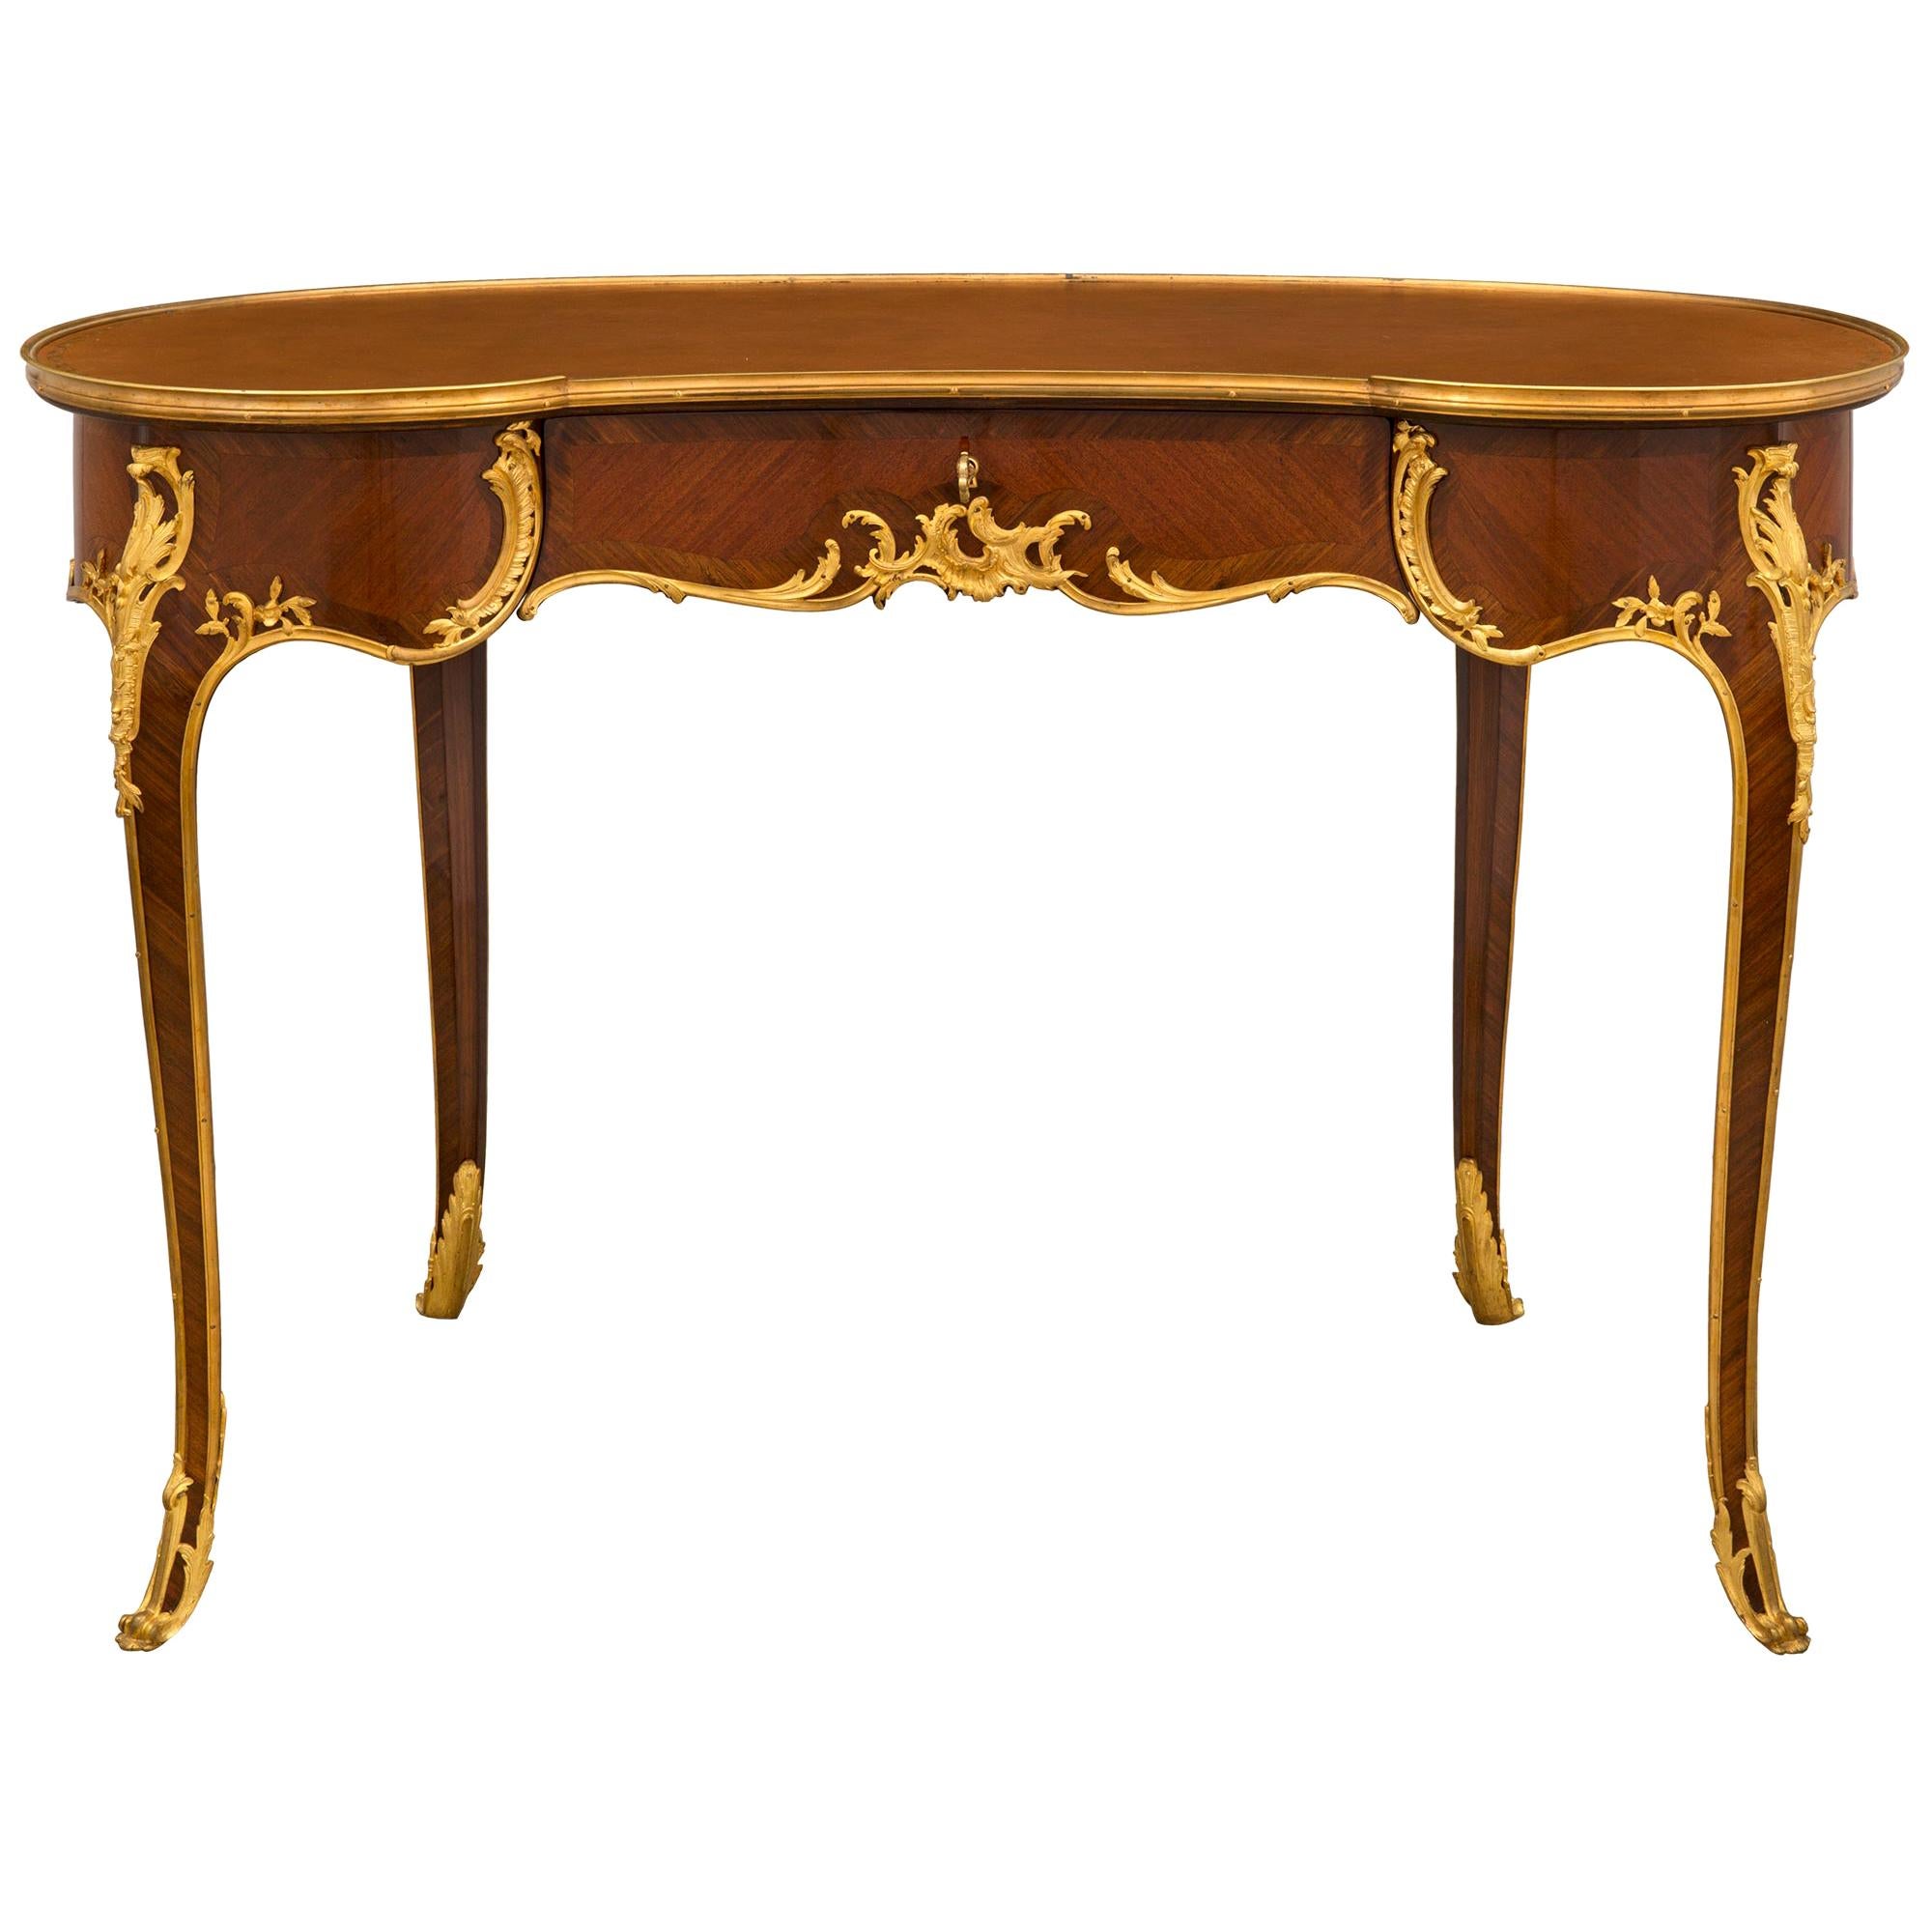 French 19th Century Louis XV Style Kingwood and Ormolu Desk, Attributed to Linke For Sale